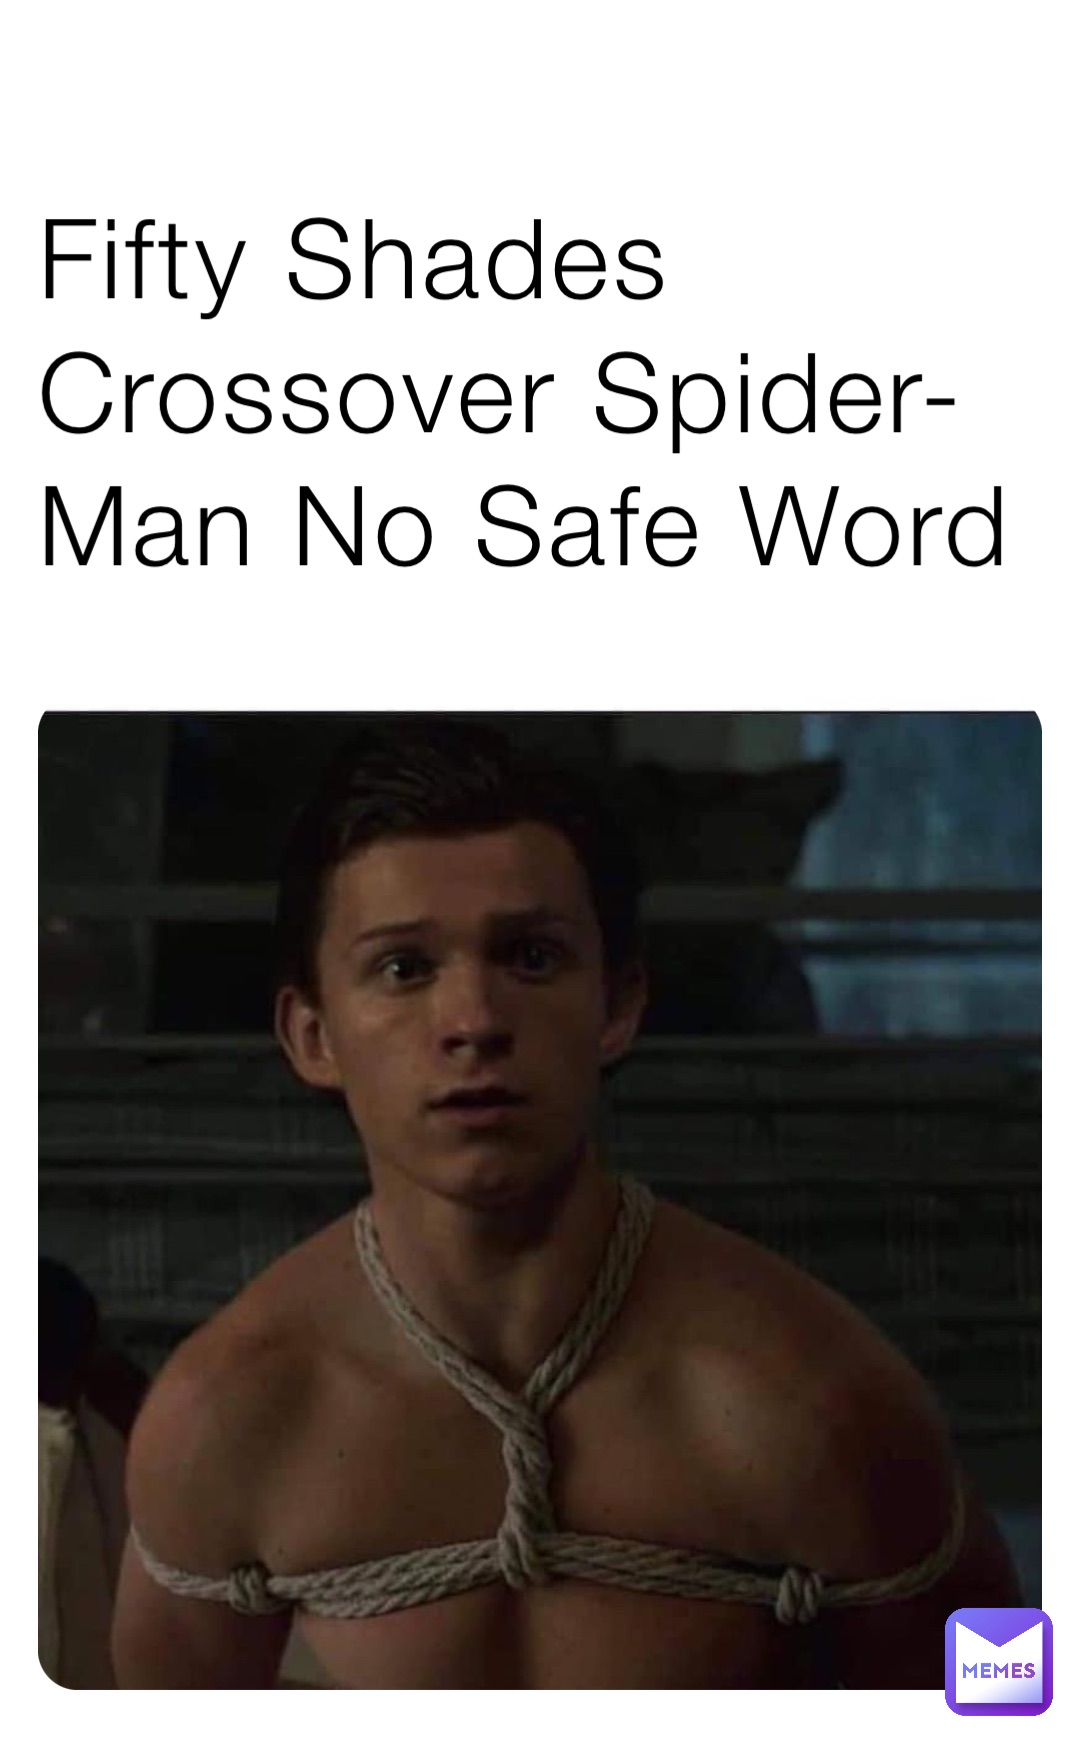 Fifty Shades Crossover Spider-Man No Safe Word